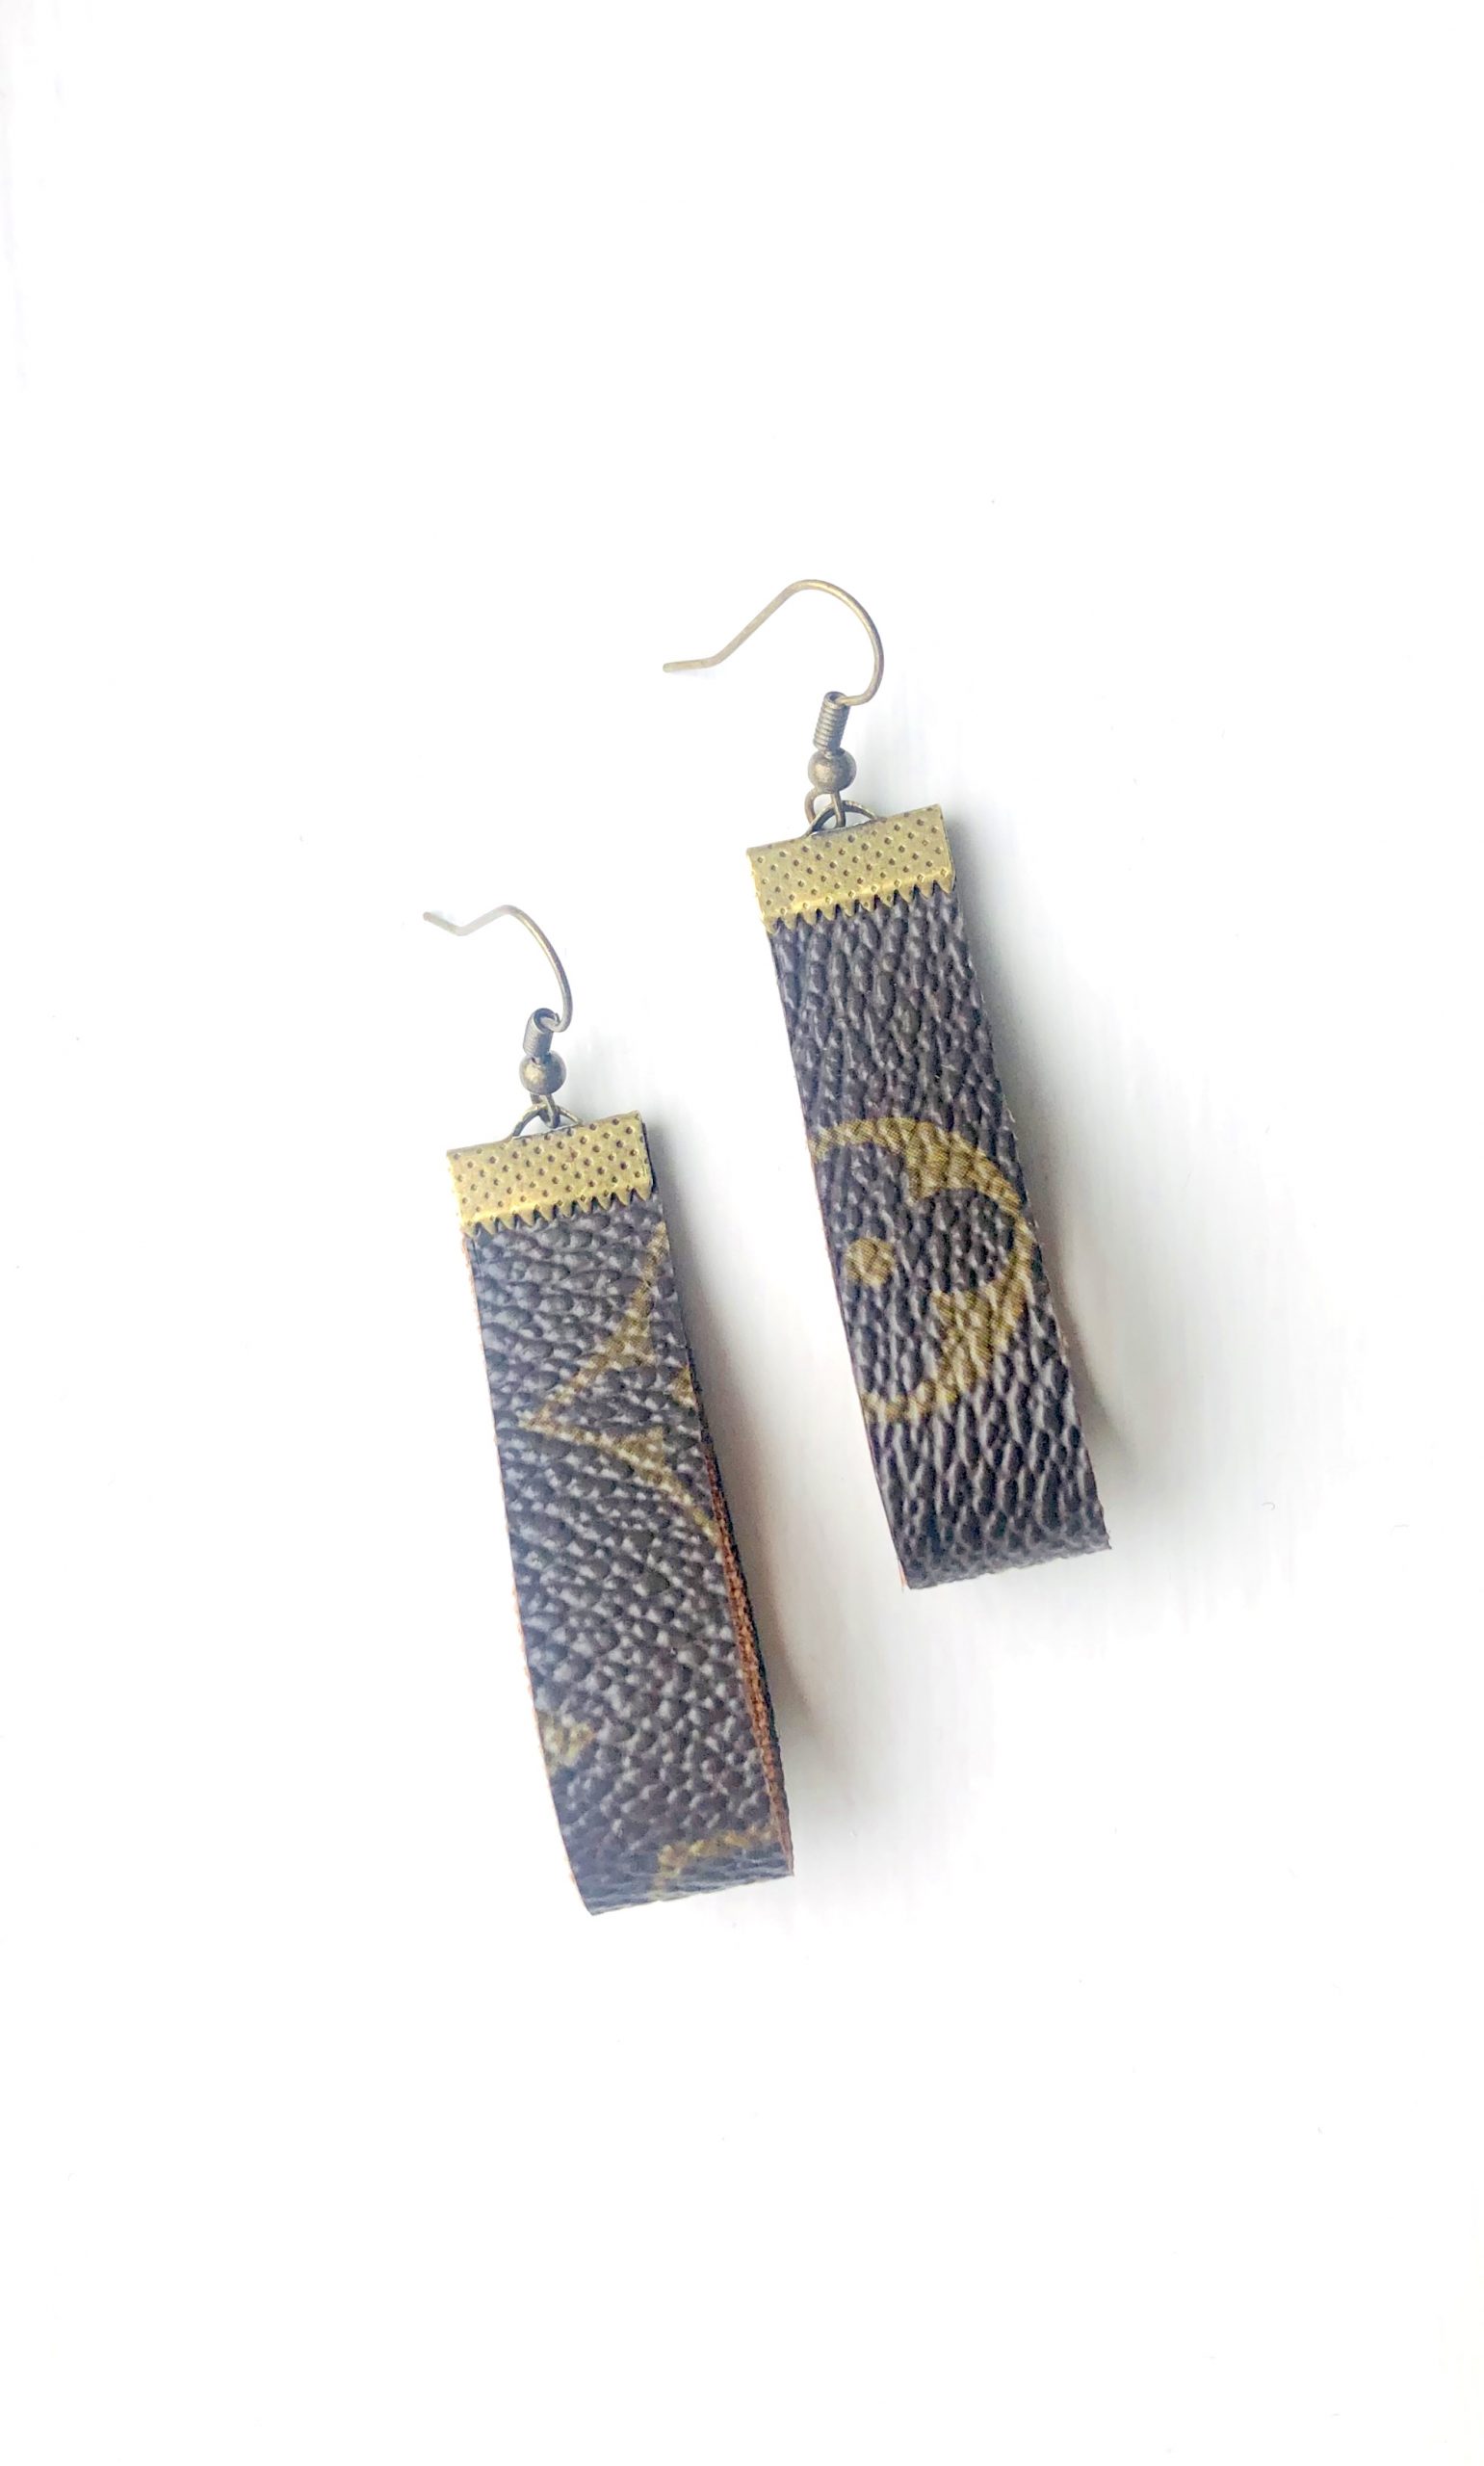 Repurposed Authentic Louis Vuitton Canvas Bar Hoop Earrings - Handmade & Curated Jewelry and ...